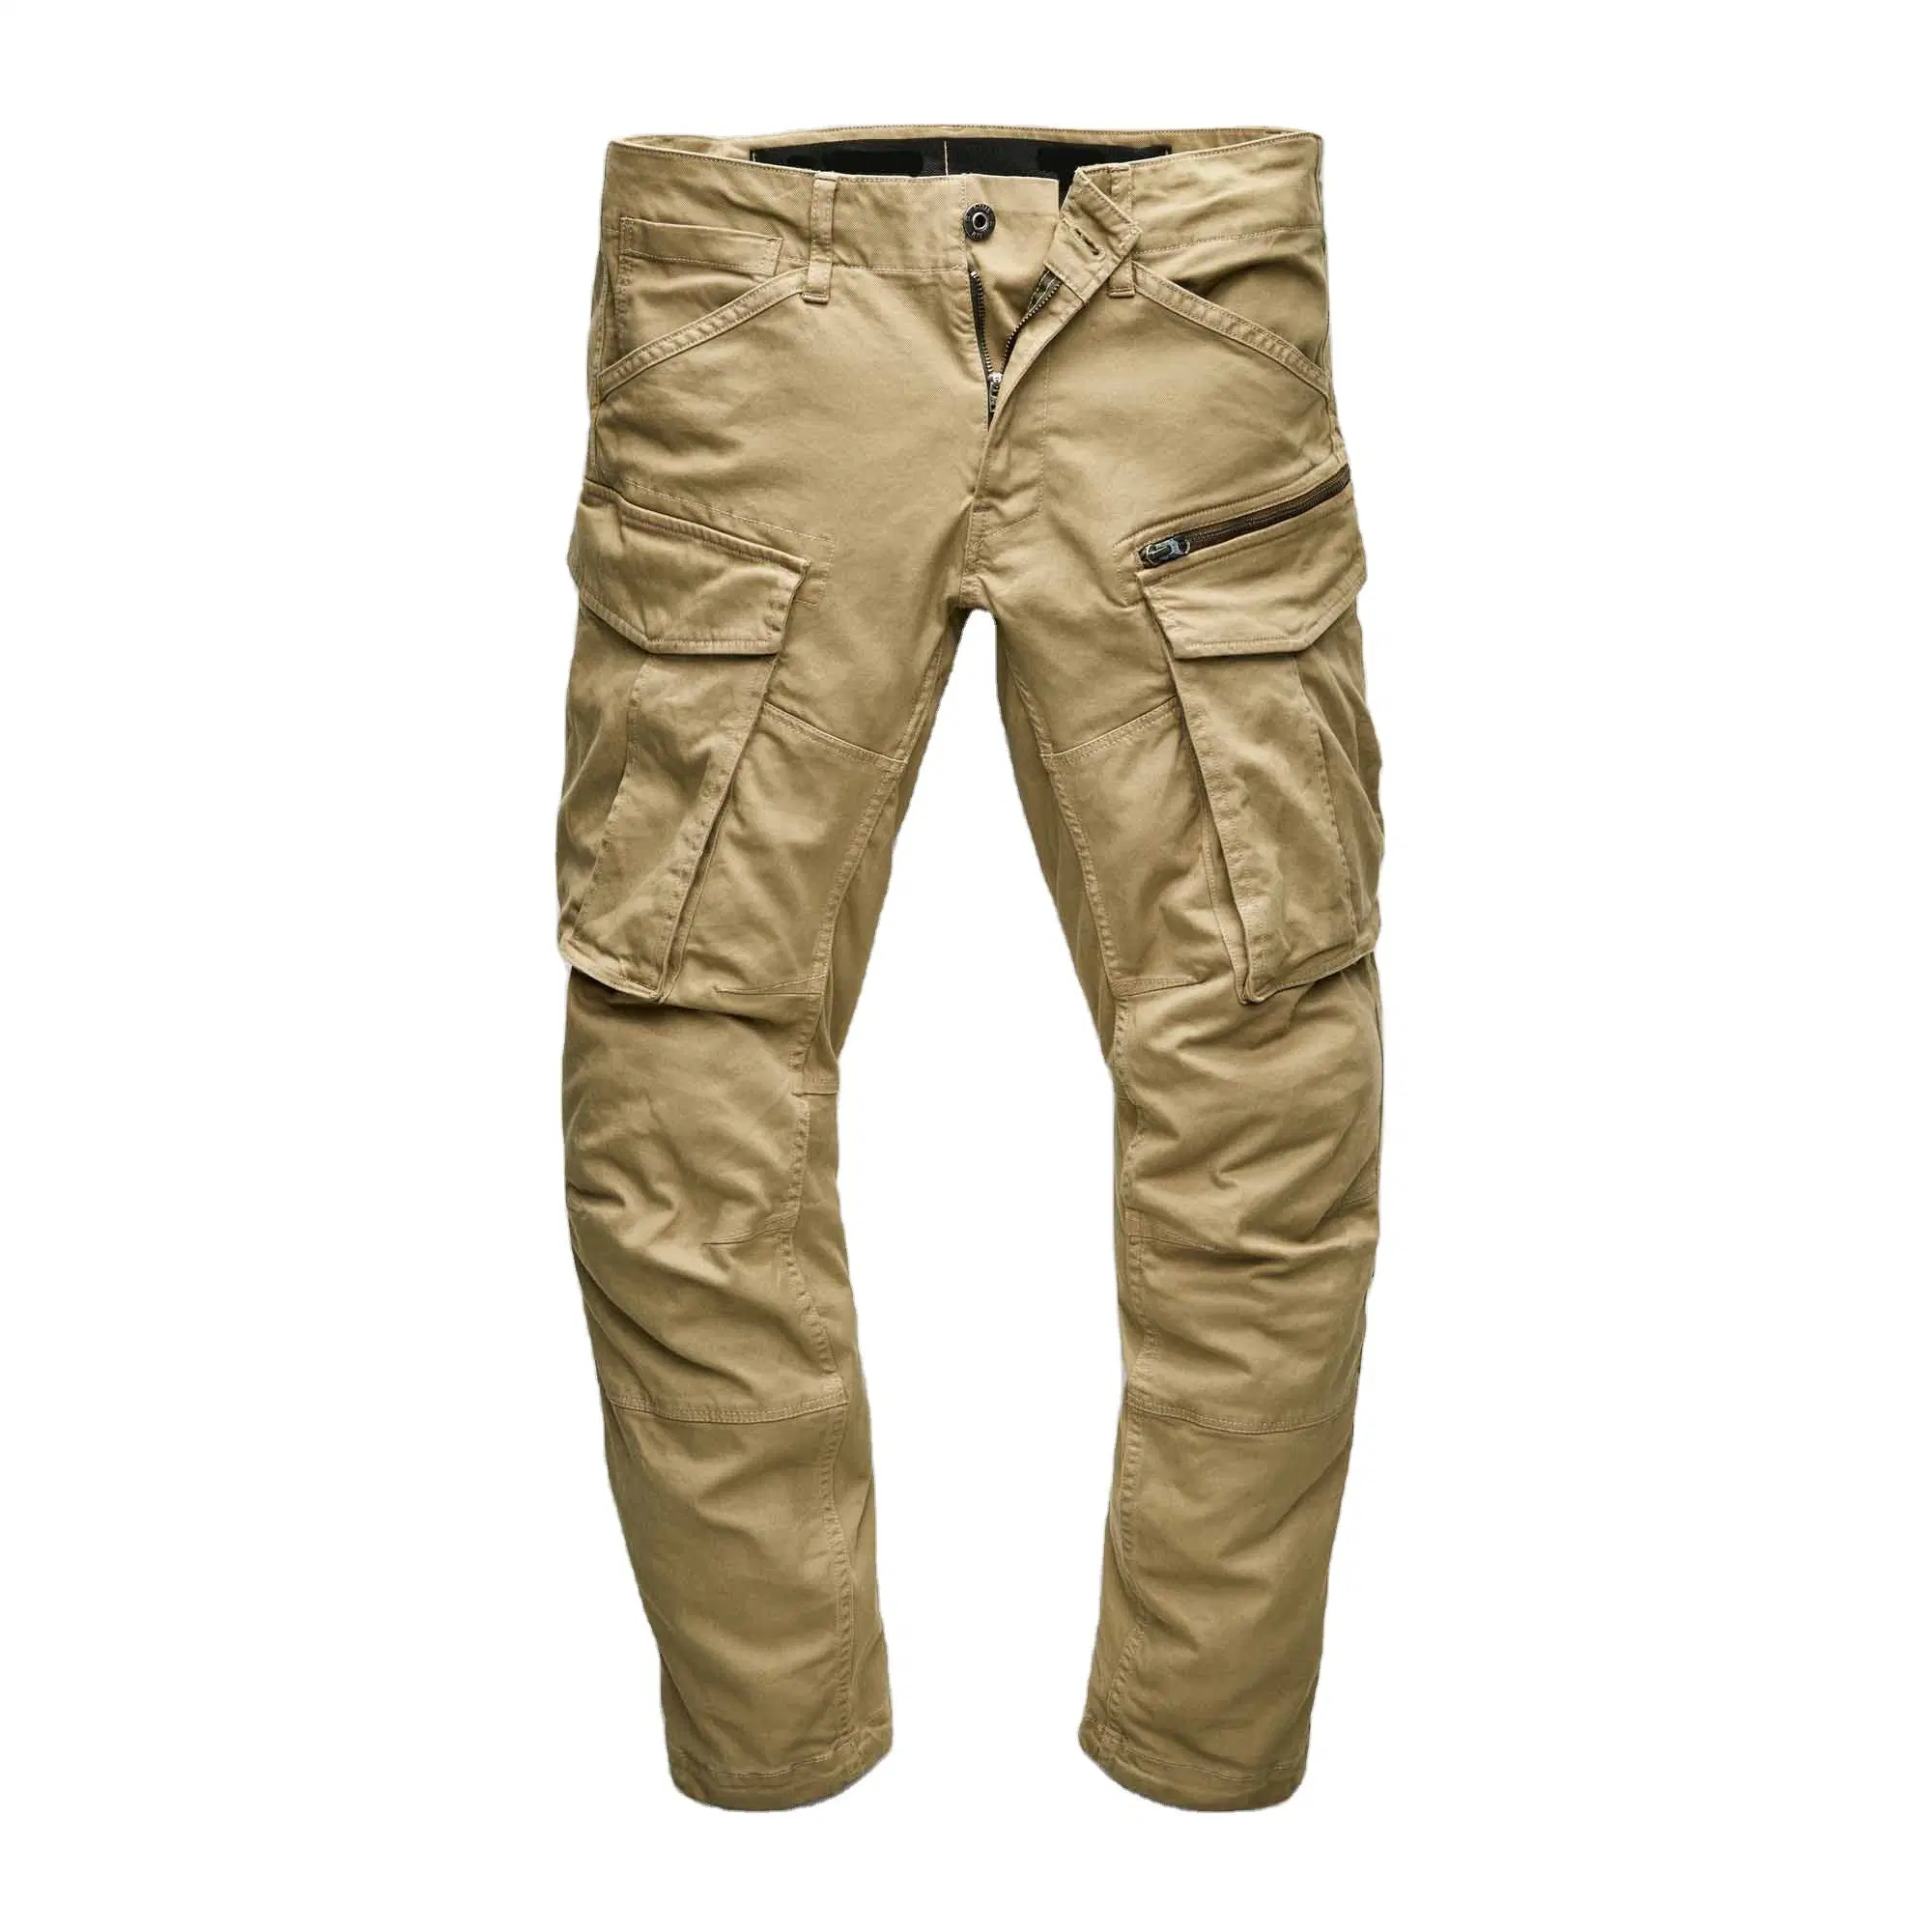 Durable and Functional Men's Outdoor Work Cargo Pants with Customized Logo